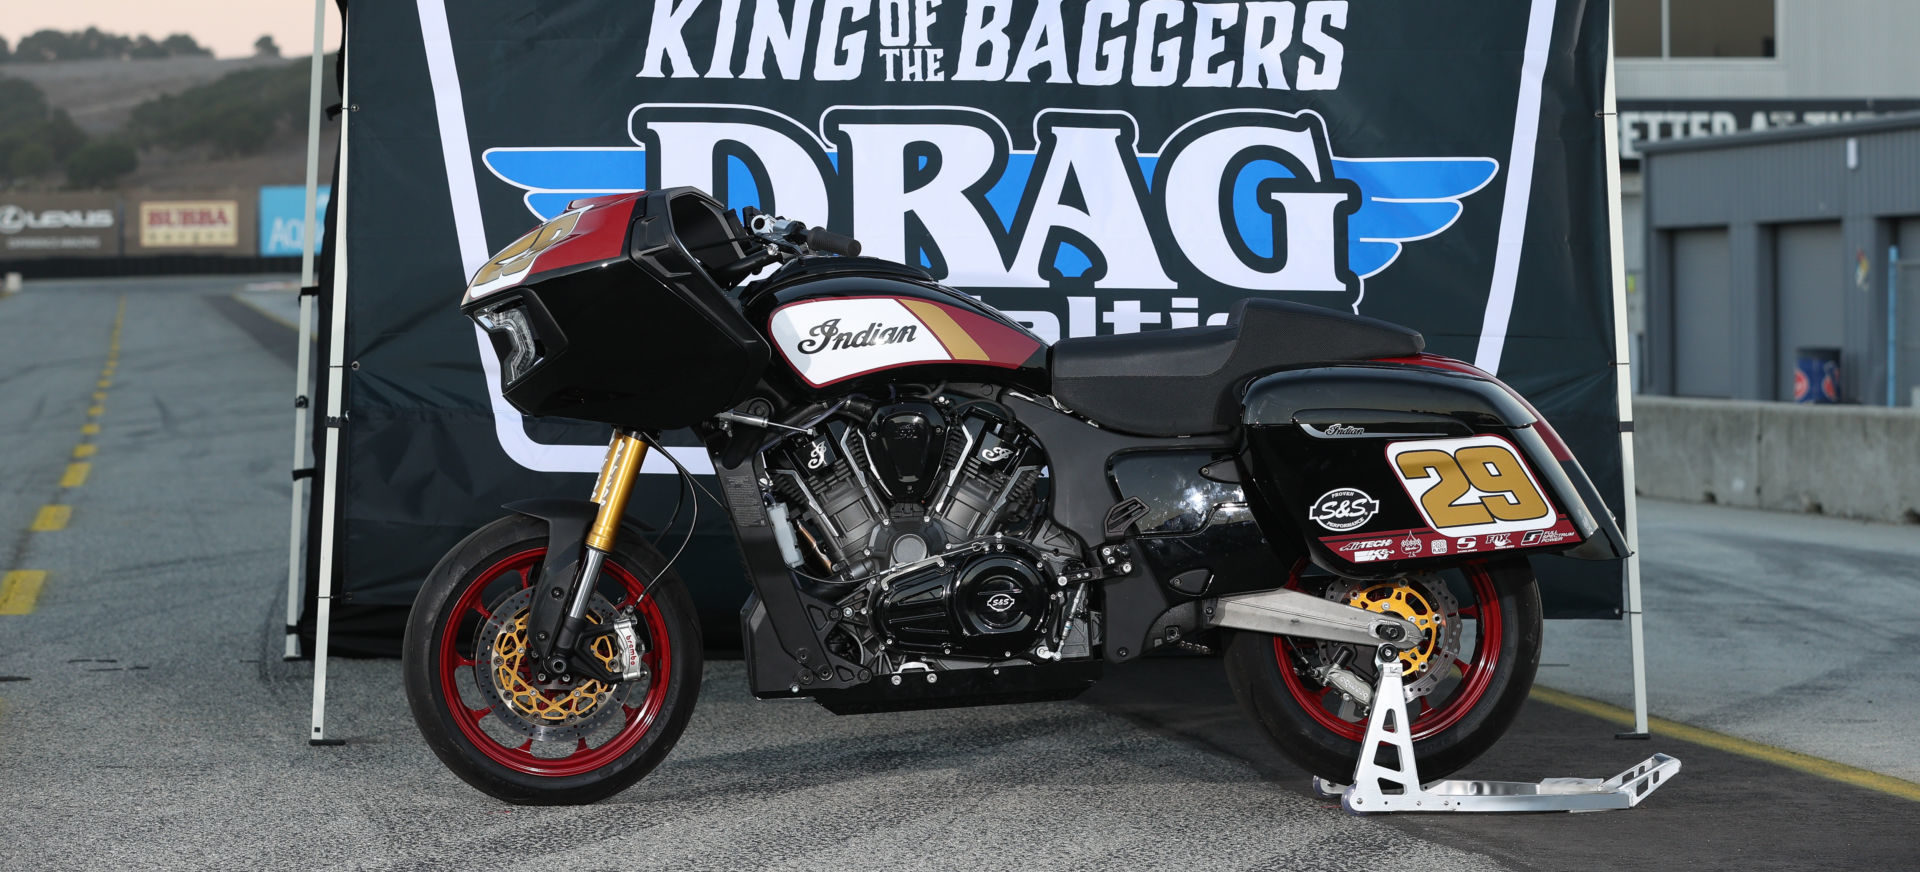 Tyler O’Hara’s Indian Challenger King of the Baggers racebike. Photo by Brian J. Nelson.